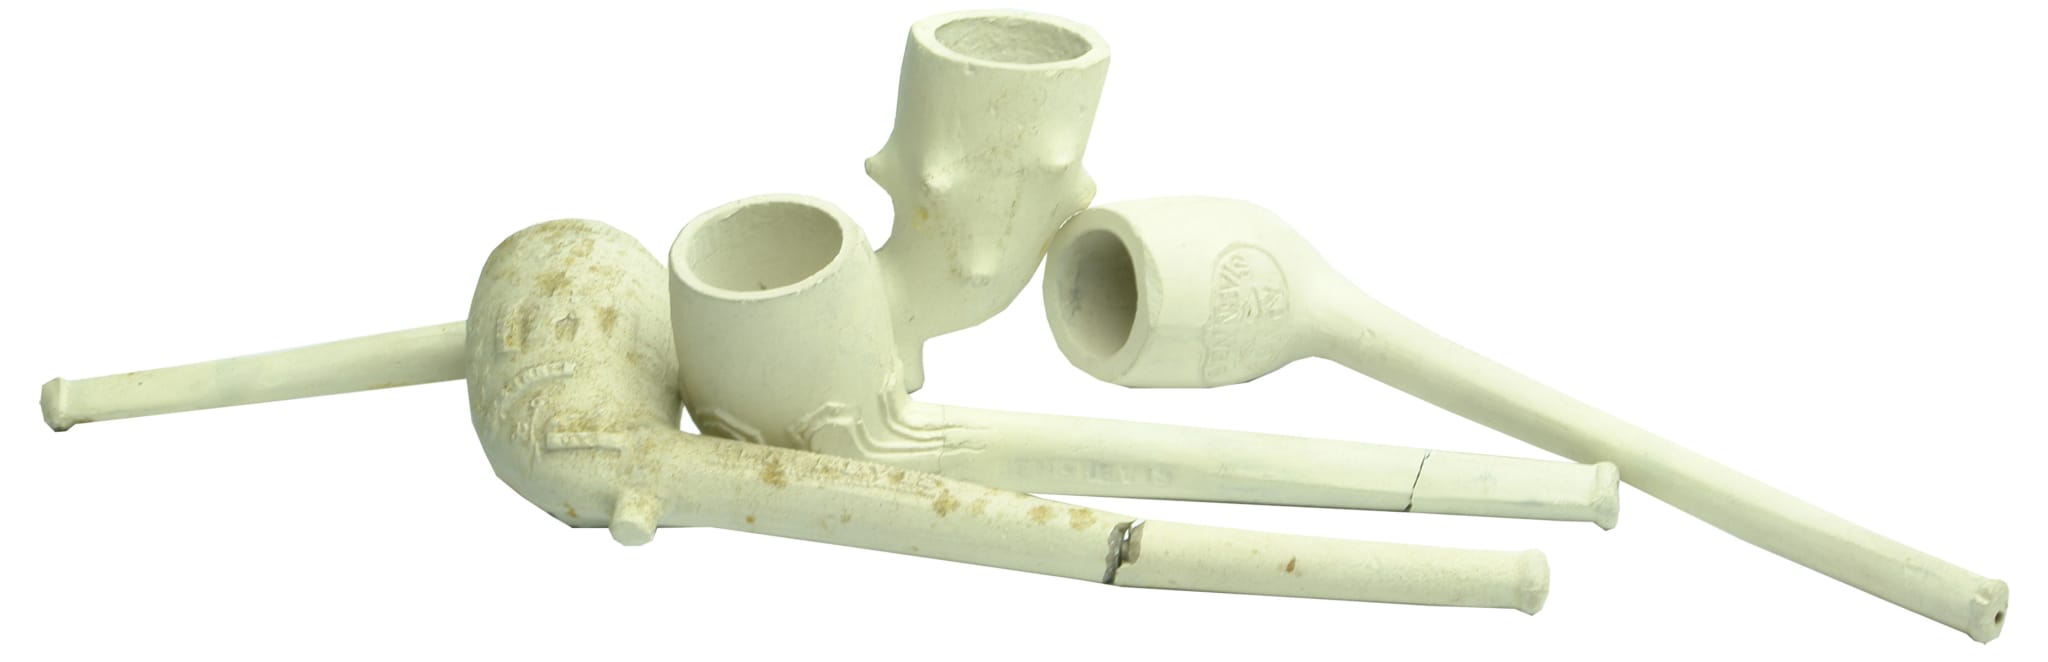 Old Clay Tobacco Pipes